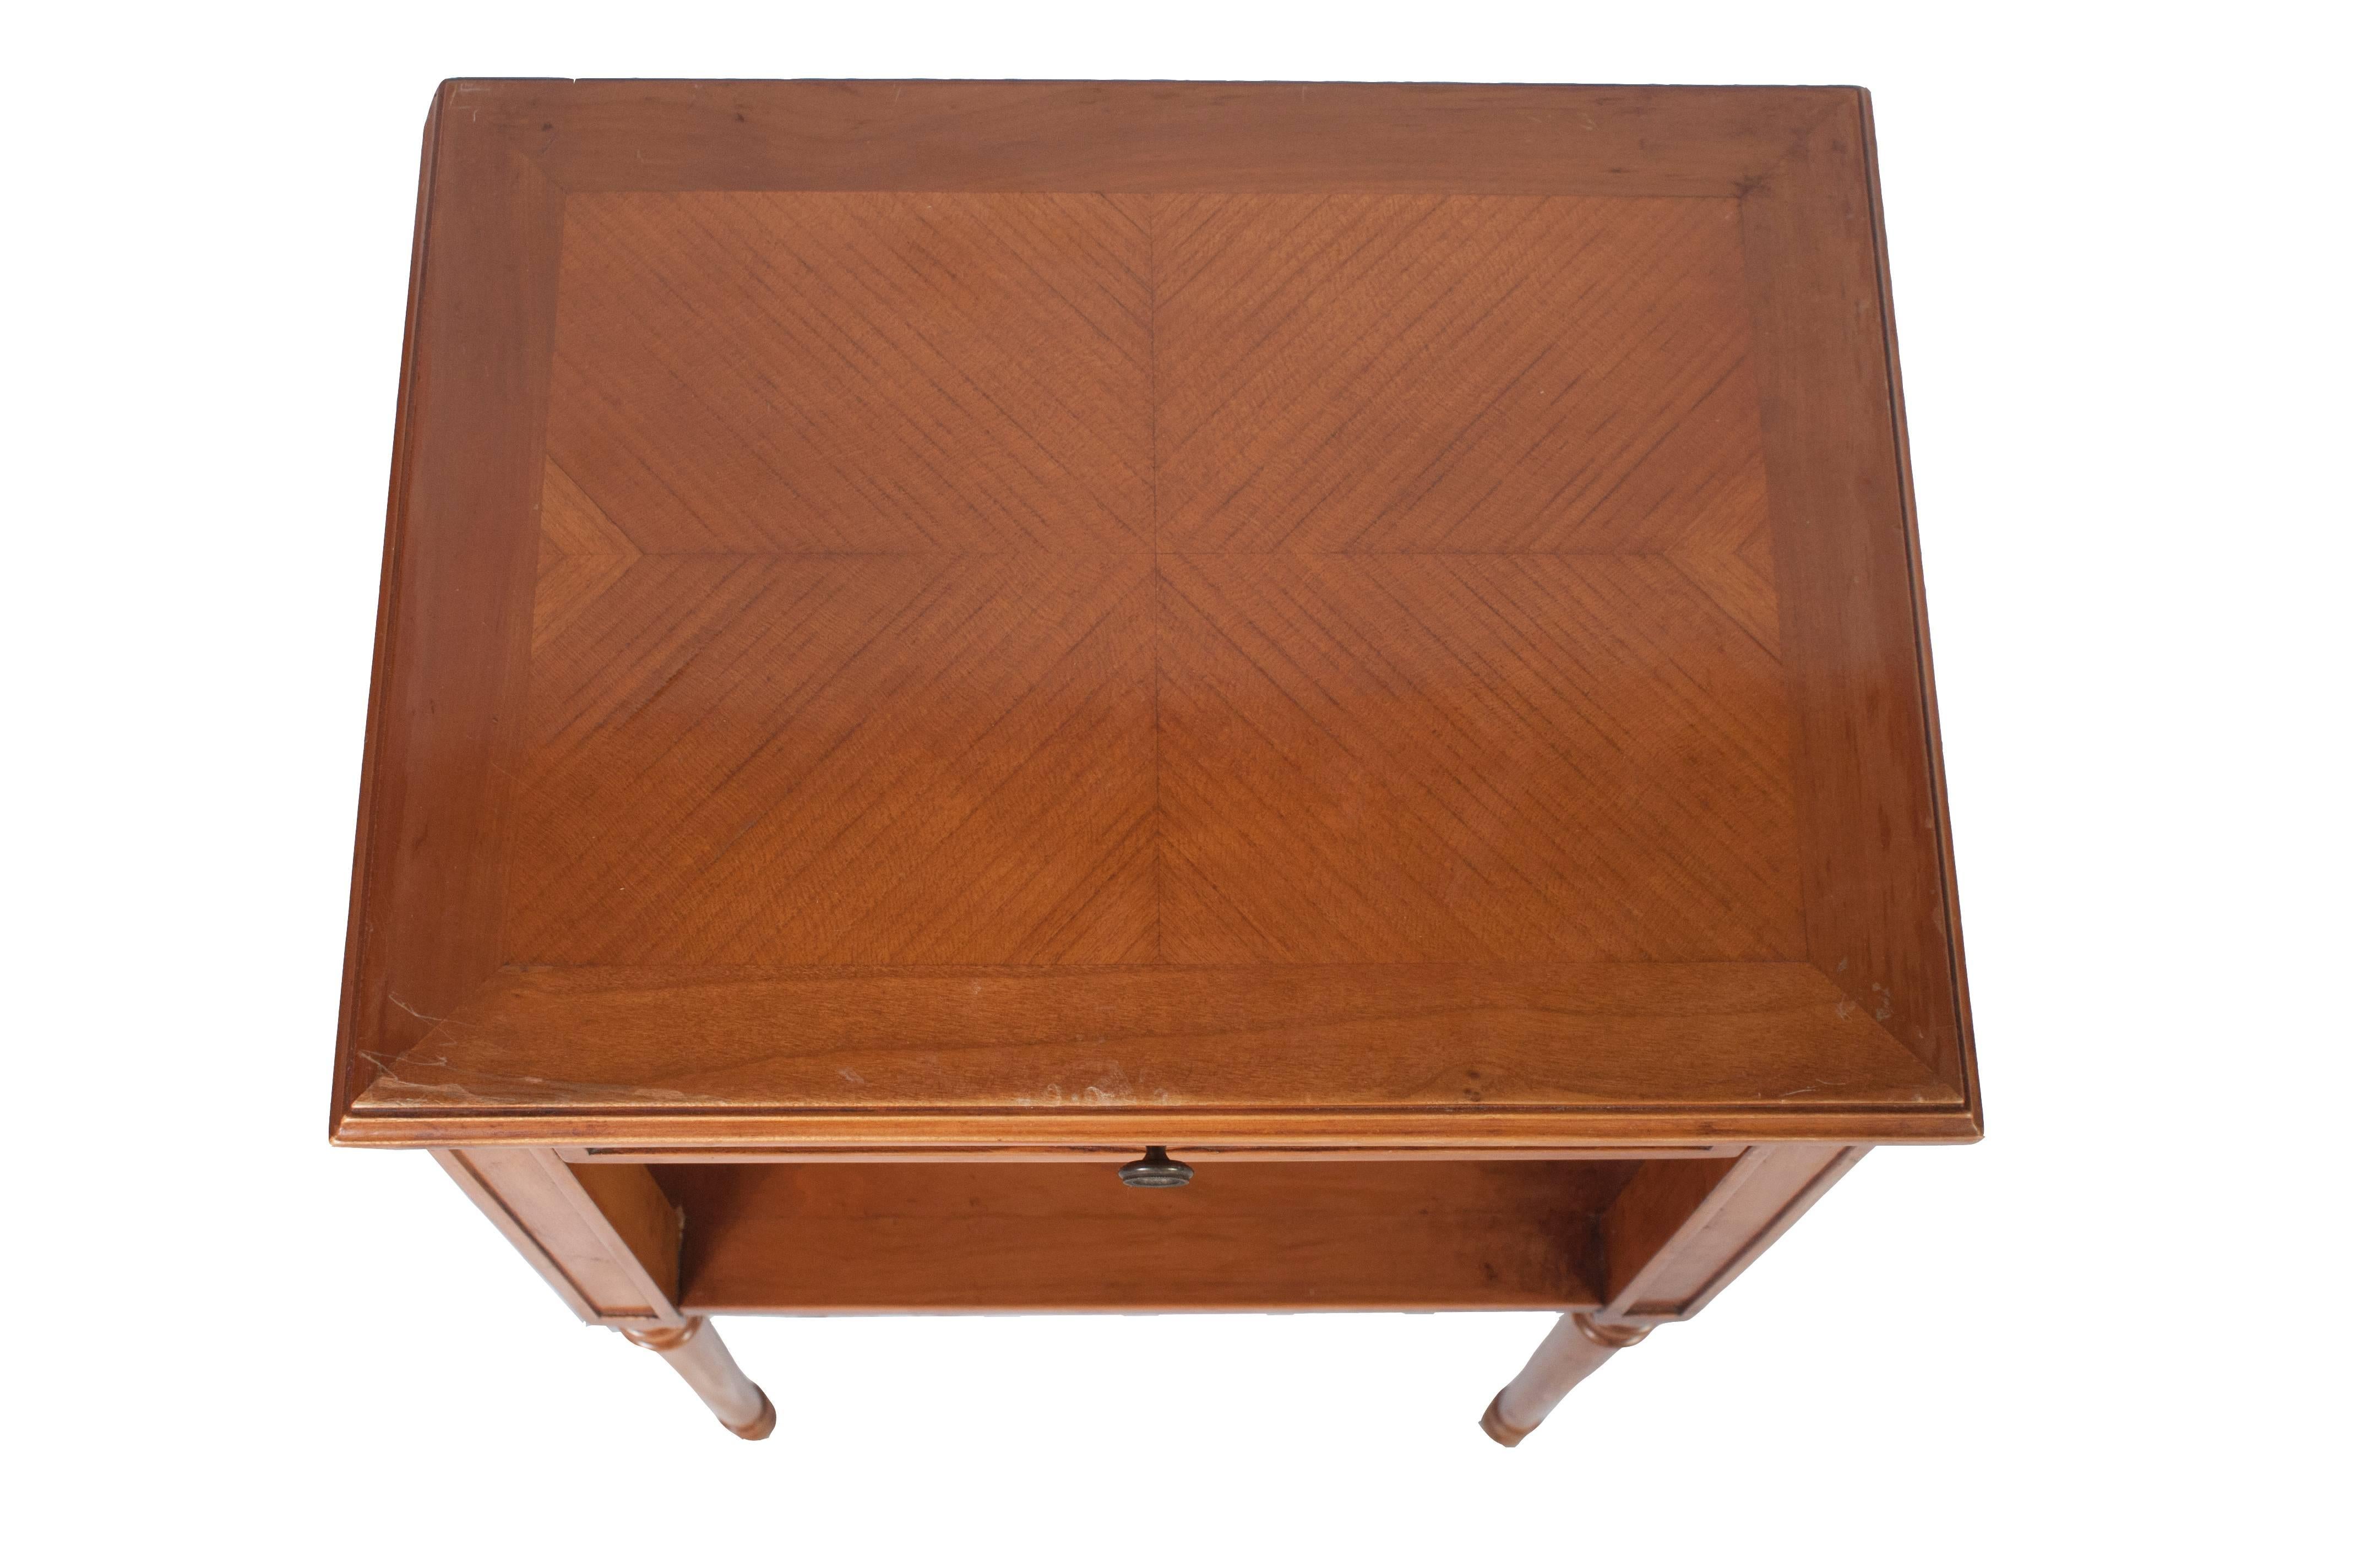 A pair of Meister (cherrywood) nightstands or side tables with drawers.